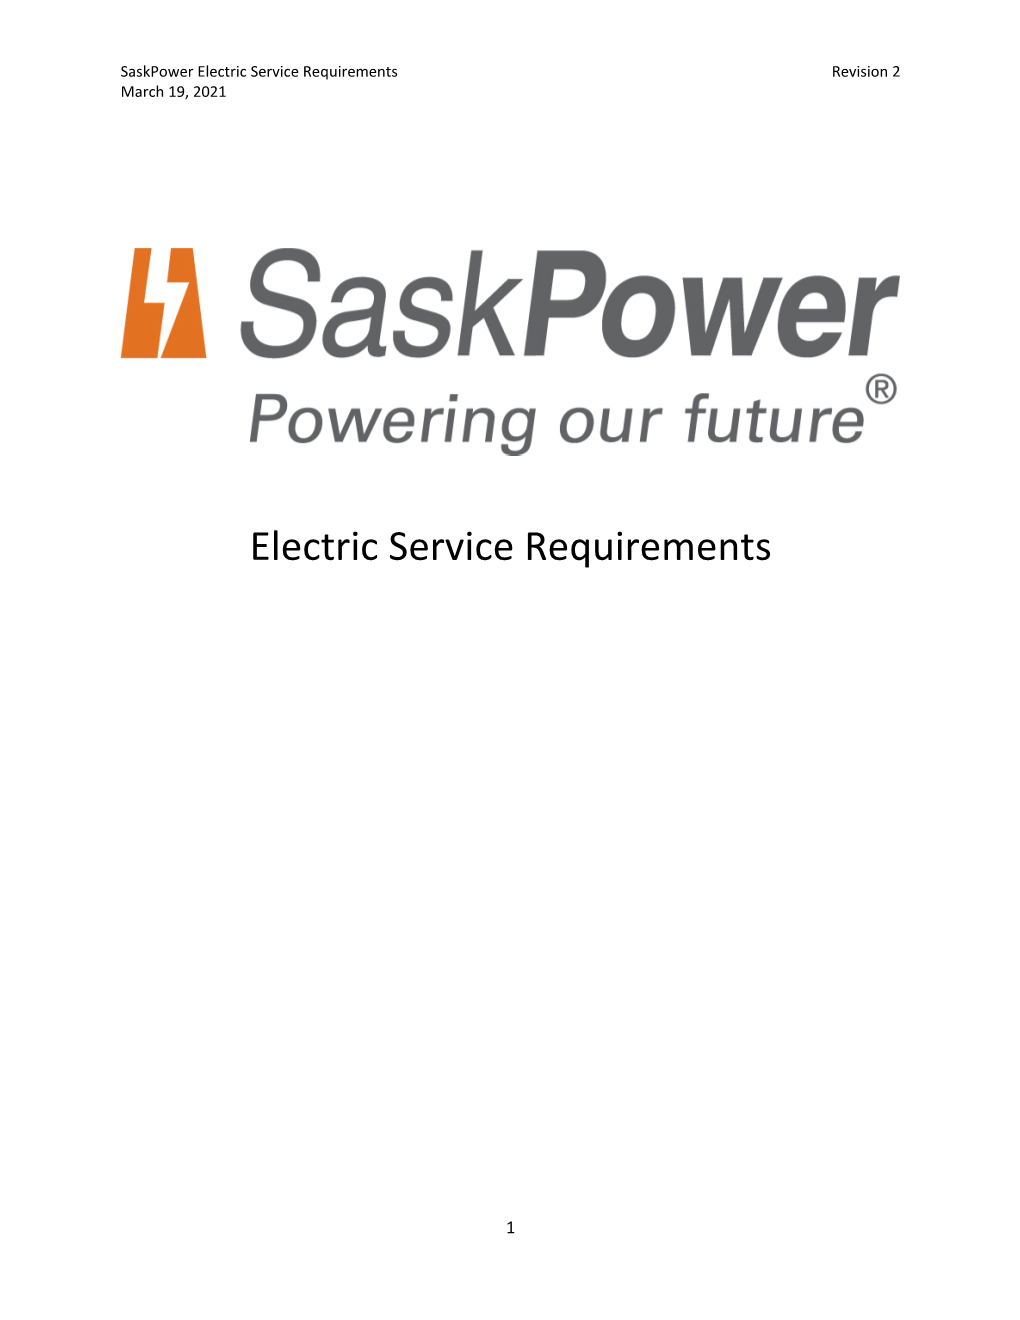 Electric Service Requirements Revision 2 March 19, 2021